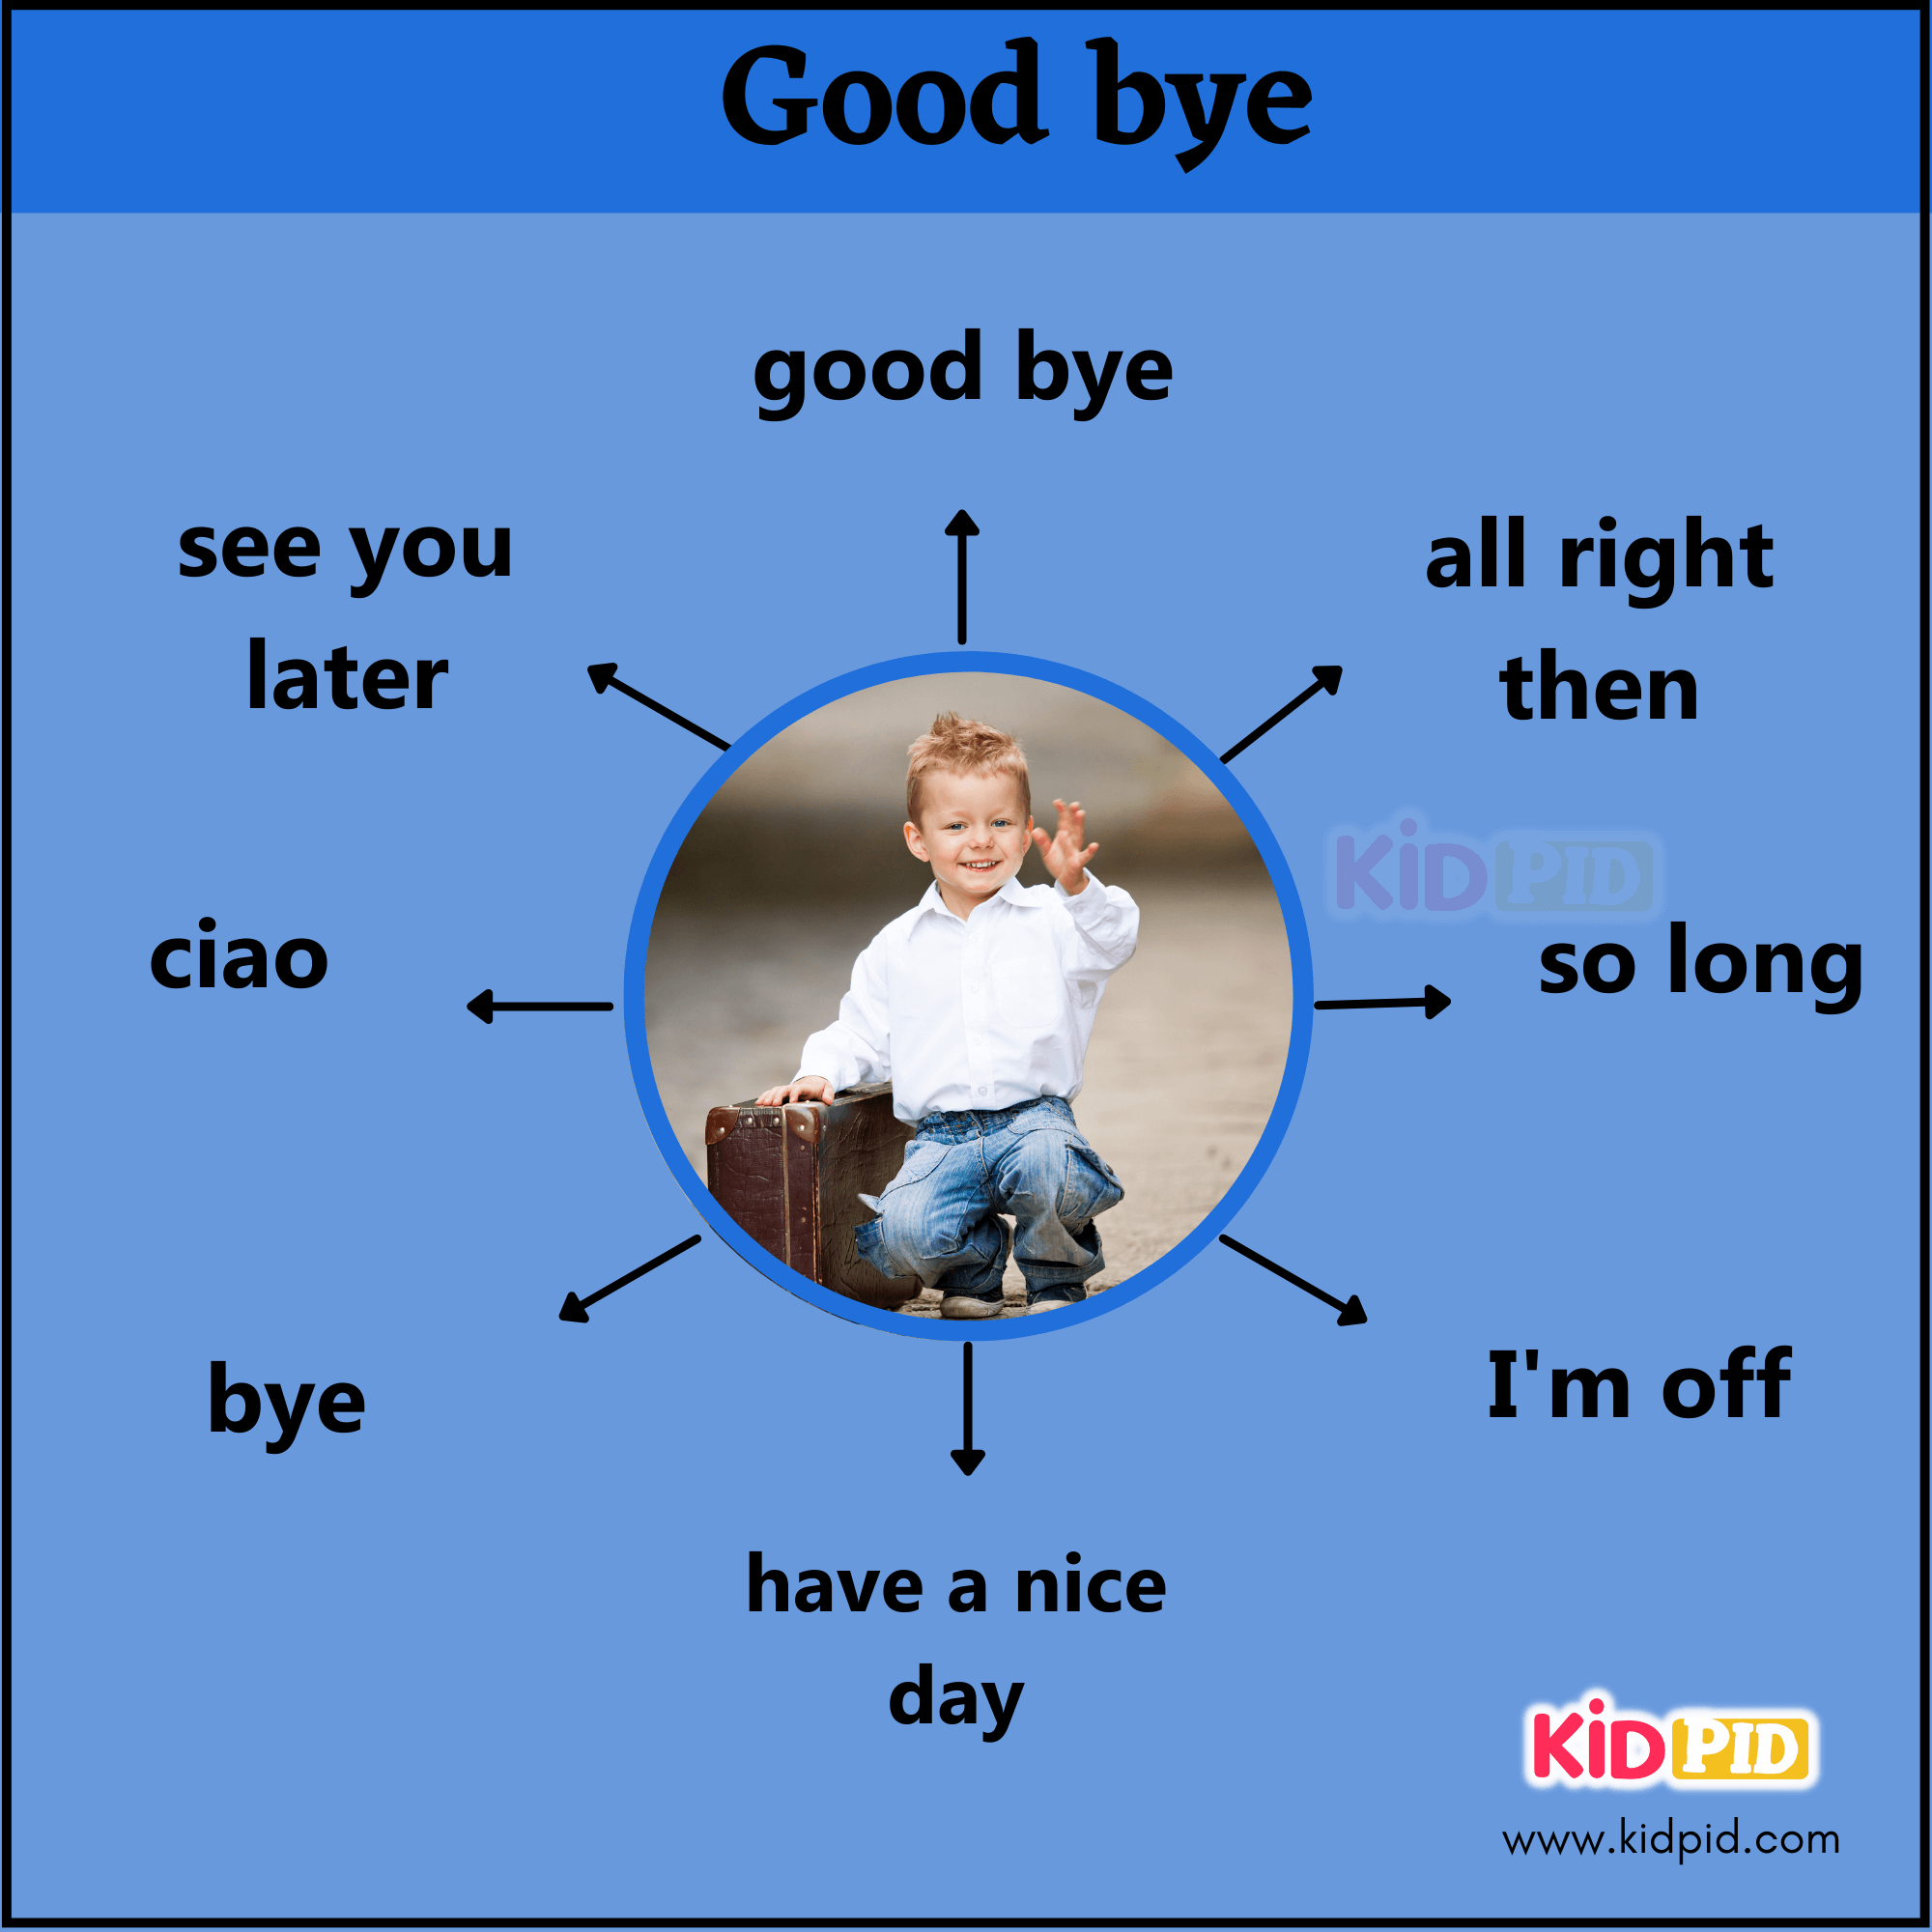 Good Bye - Important Daily Vocabulary and Conversation